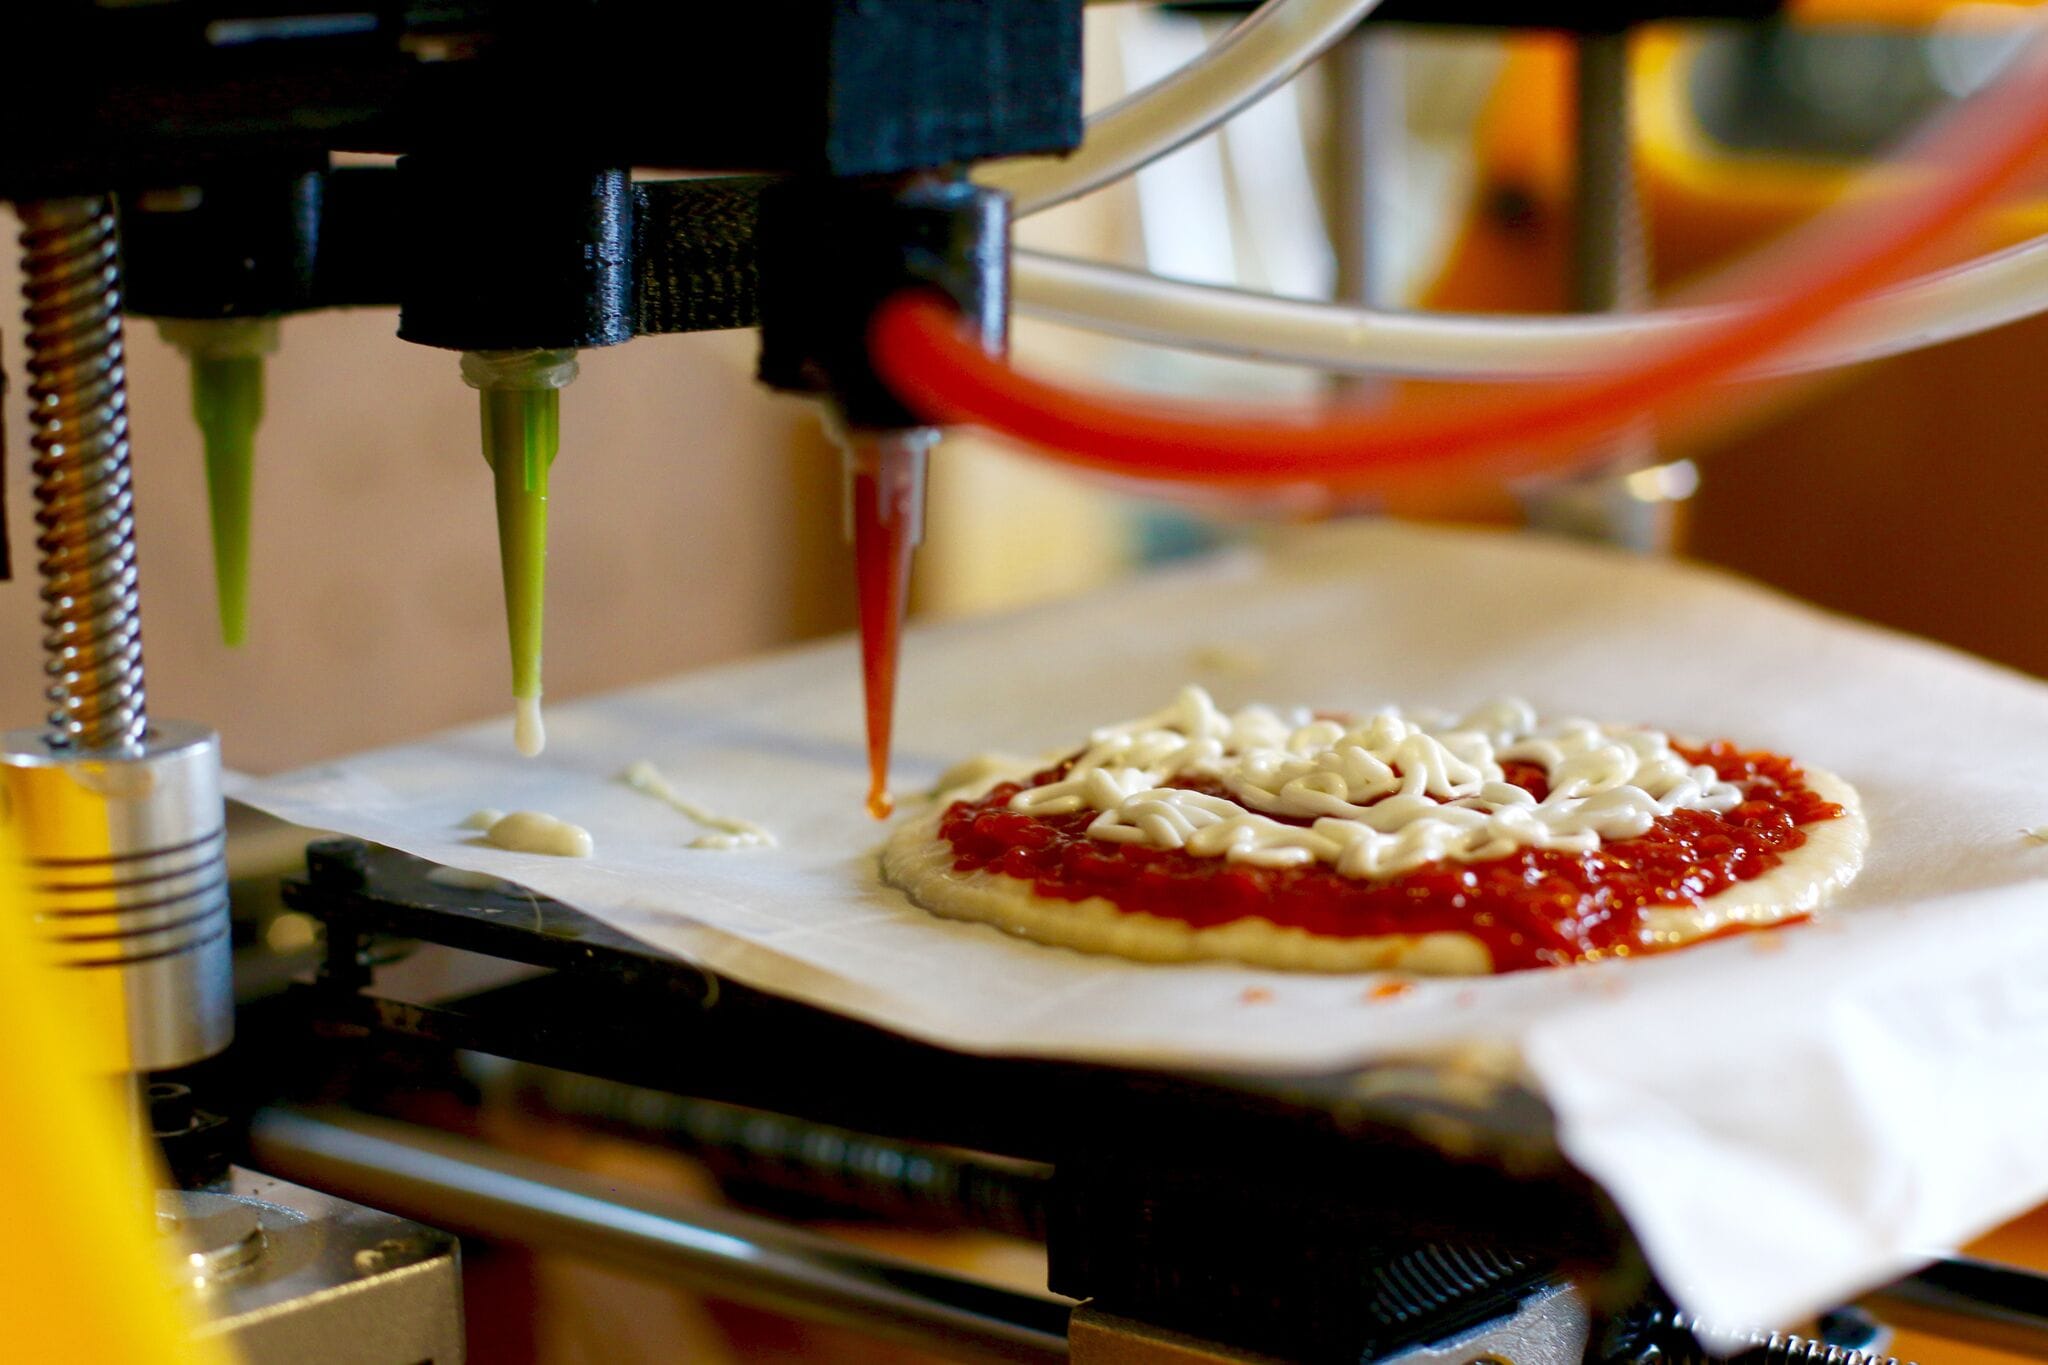  A 3D printed pizza by BeeHex, but what could the future hold for 3D printed food?  